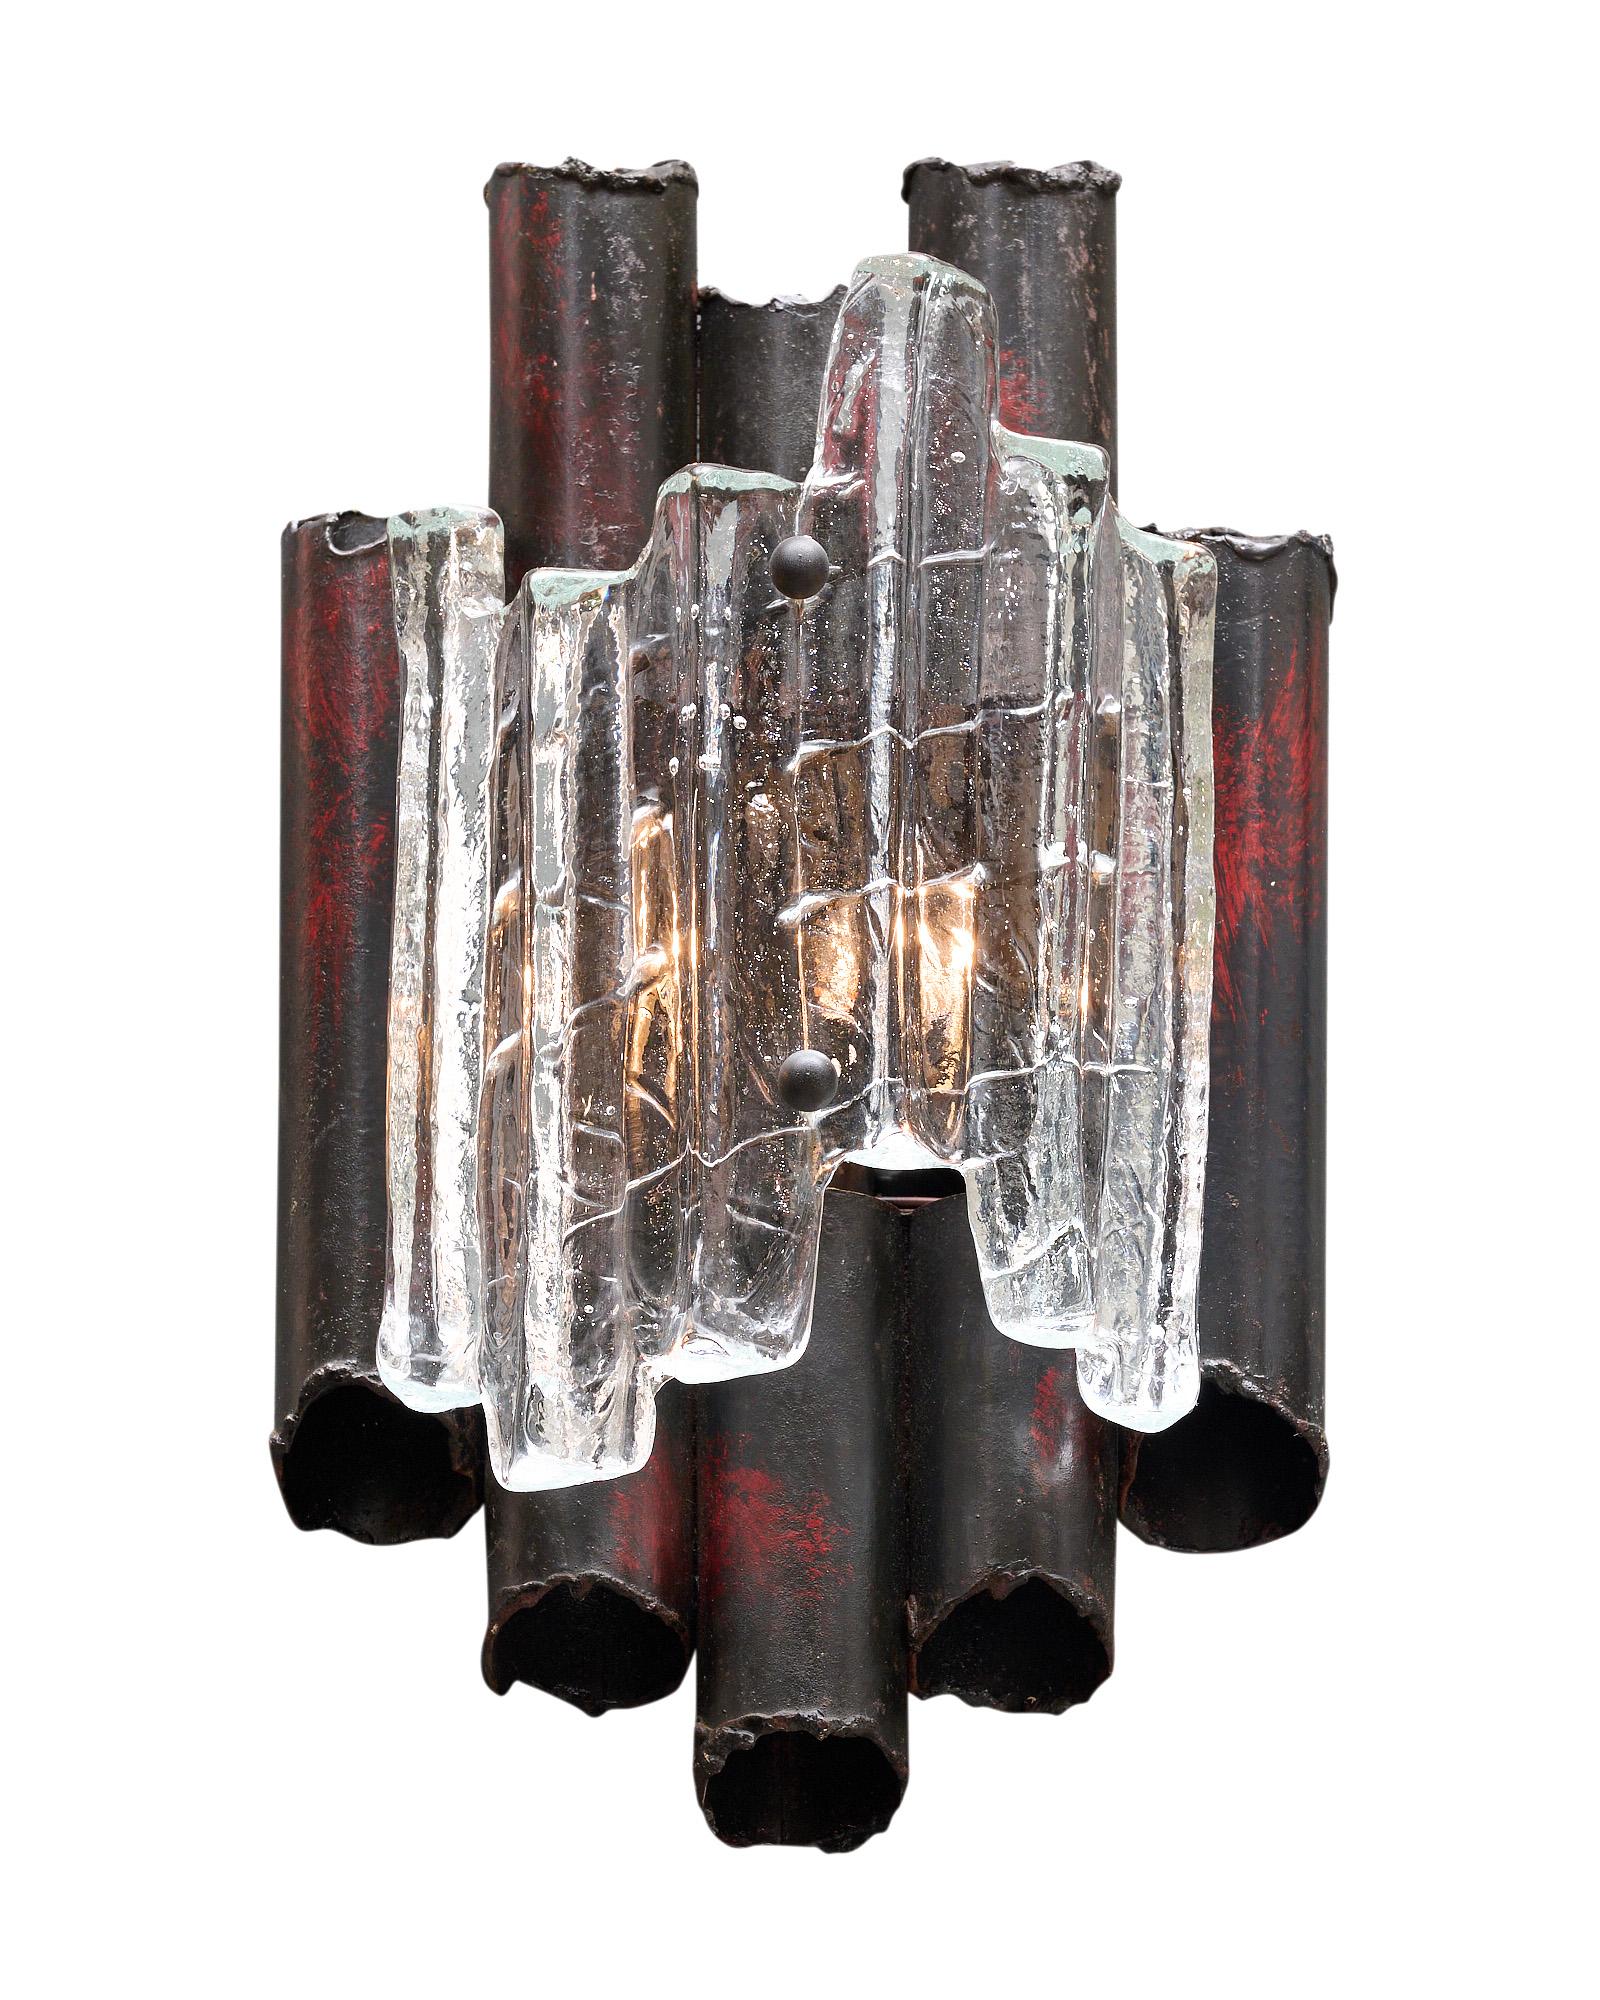 Pair of sconces made of metal and Murano glass. The metal structures feature tubed metal covered with Murano glass elements. We love the brutalist details of this pair. They have been newly wired to fit US standards.
